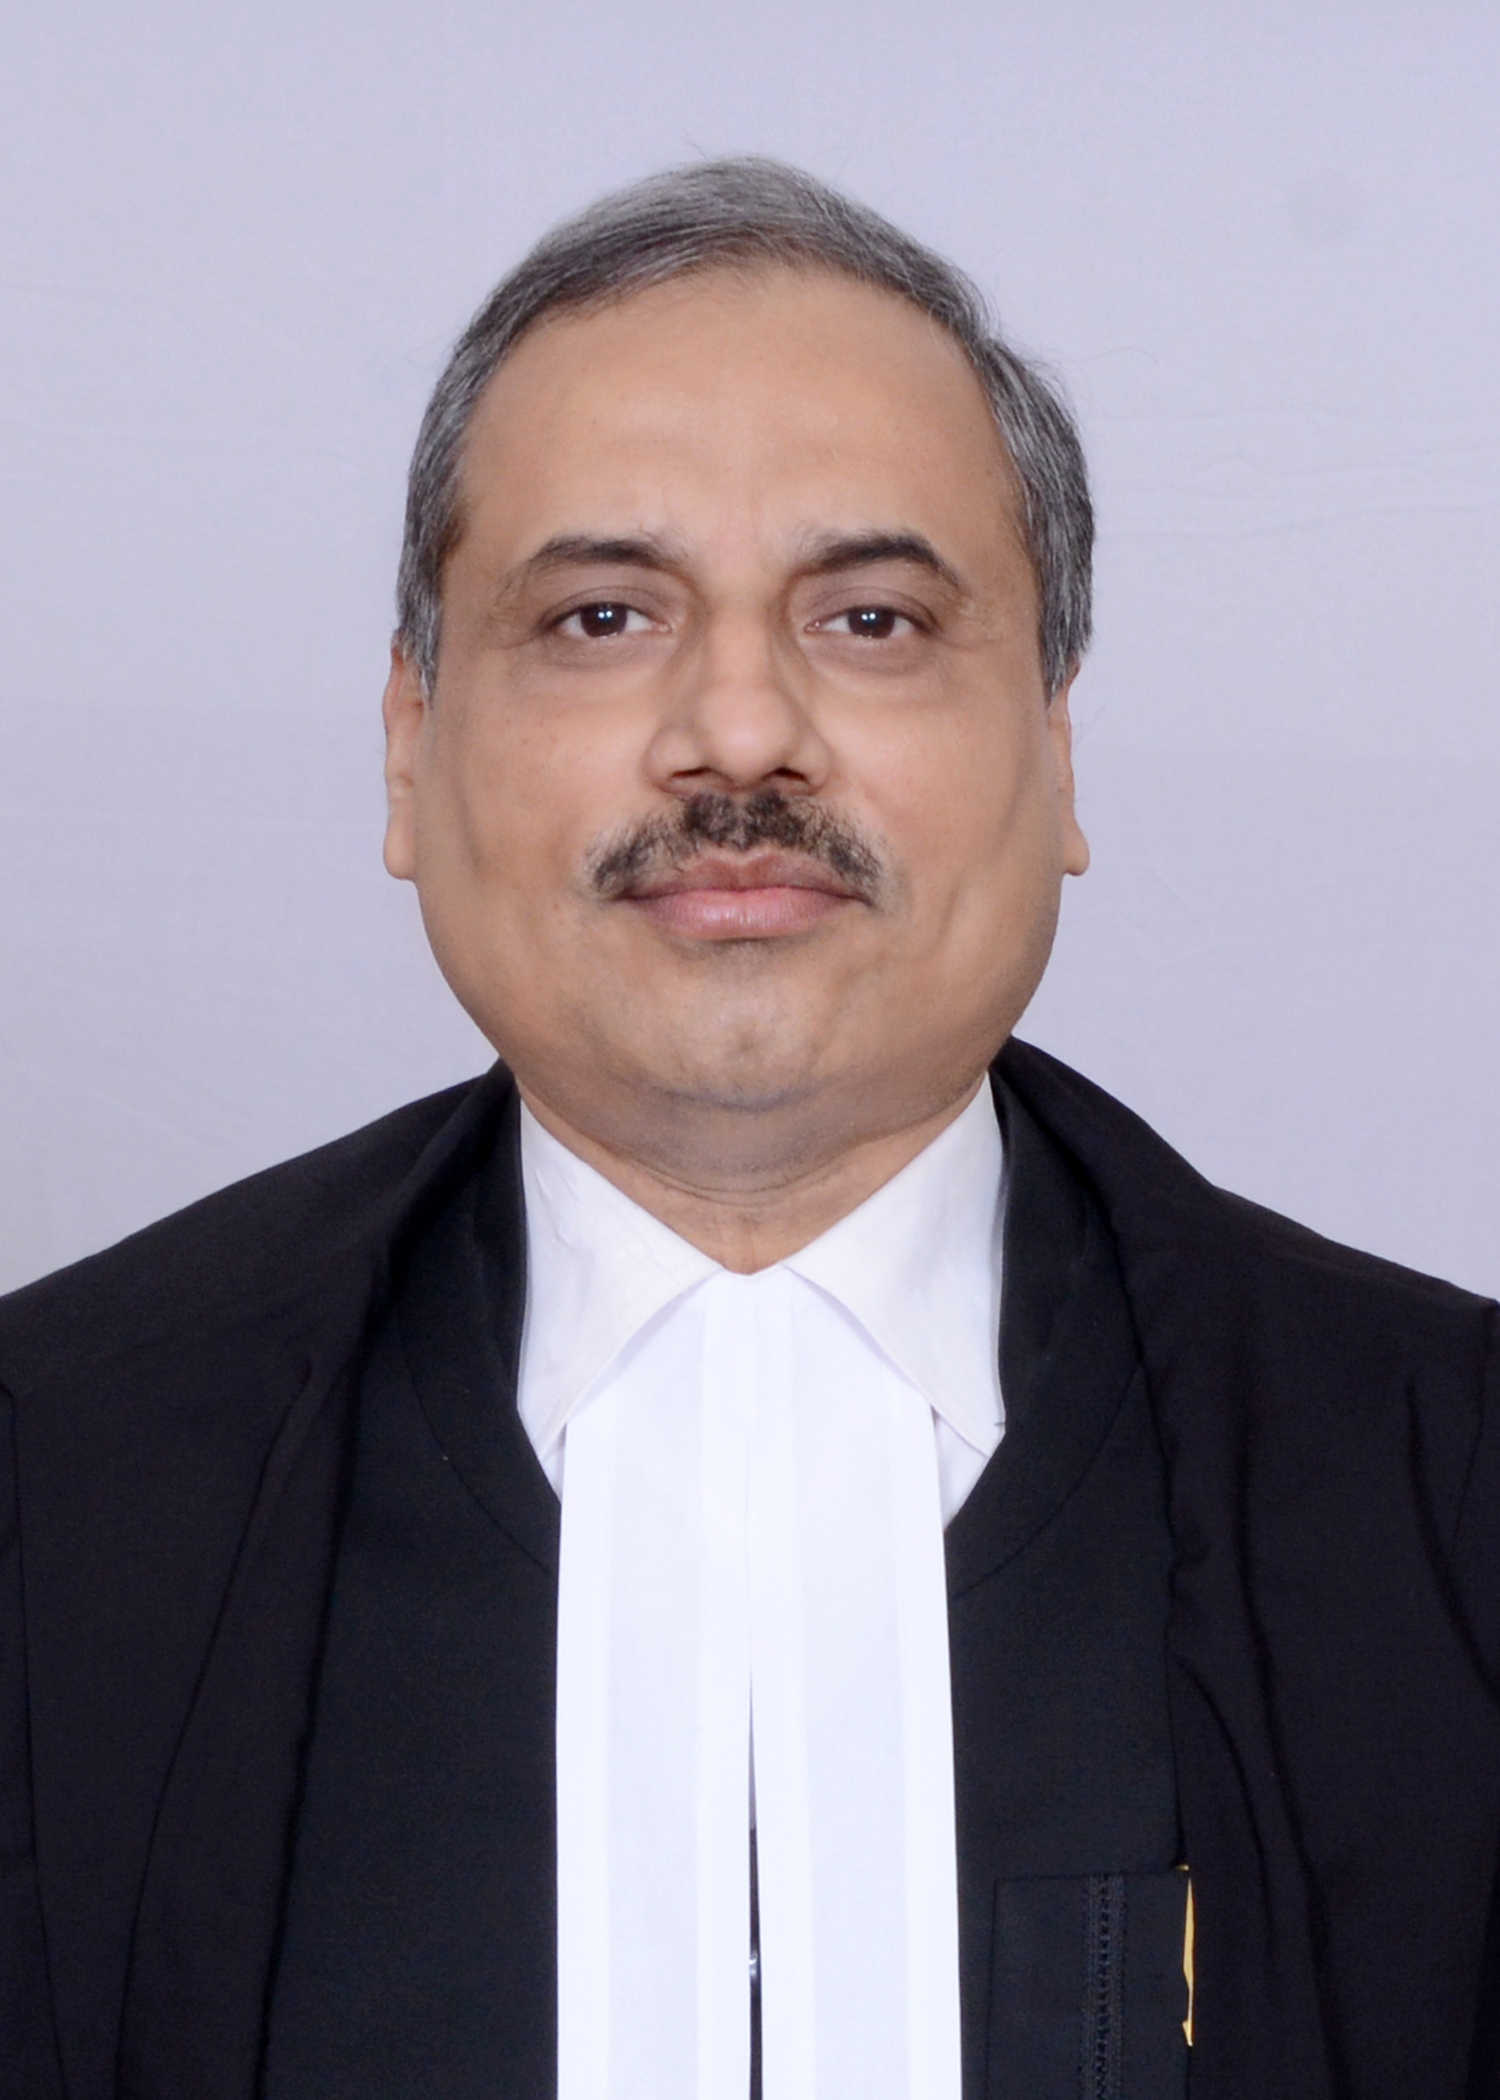 Honourable Chief Justice